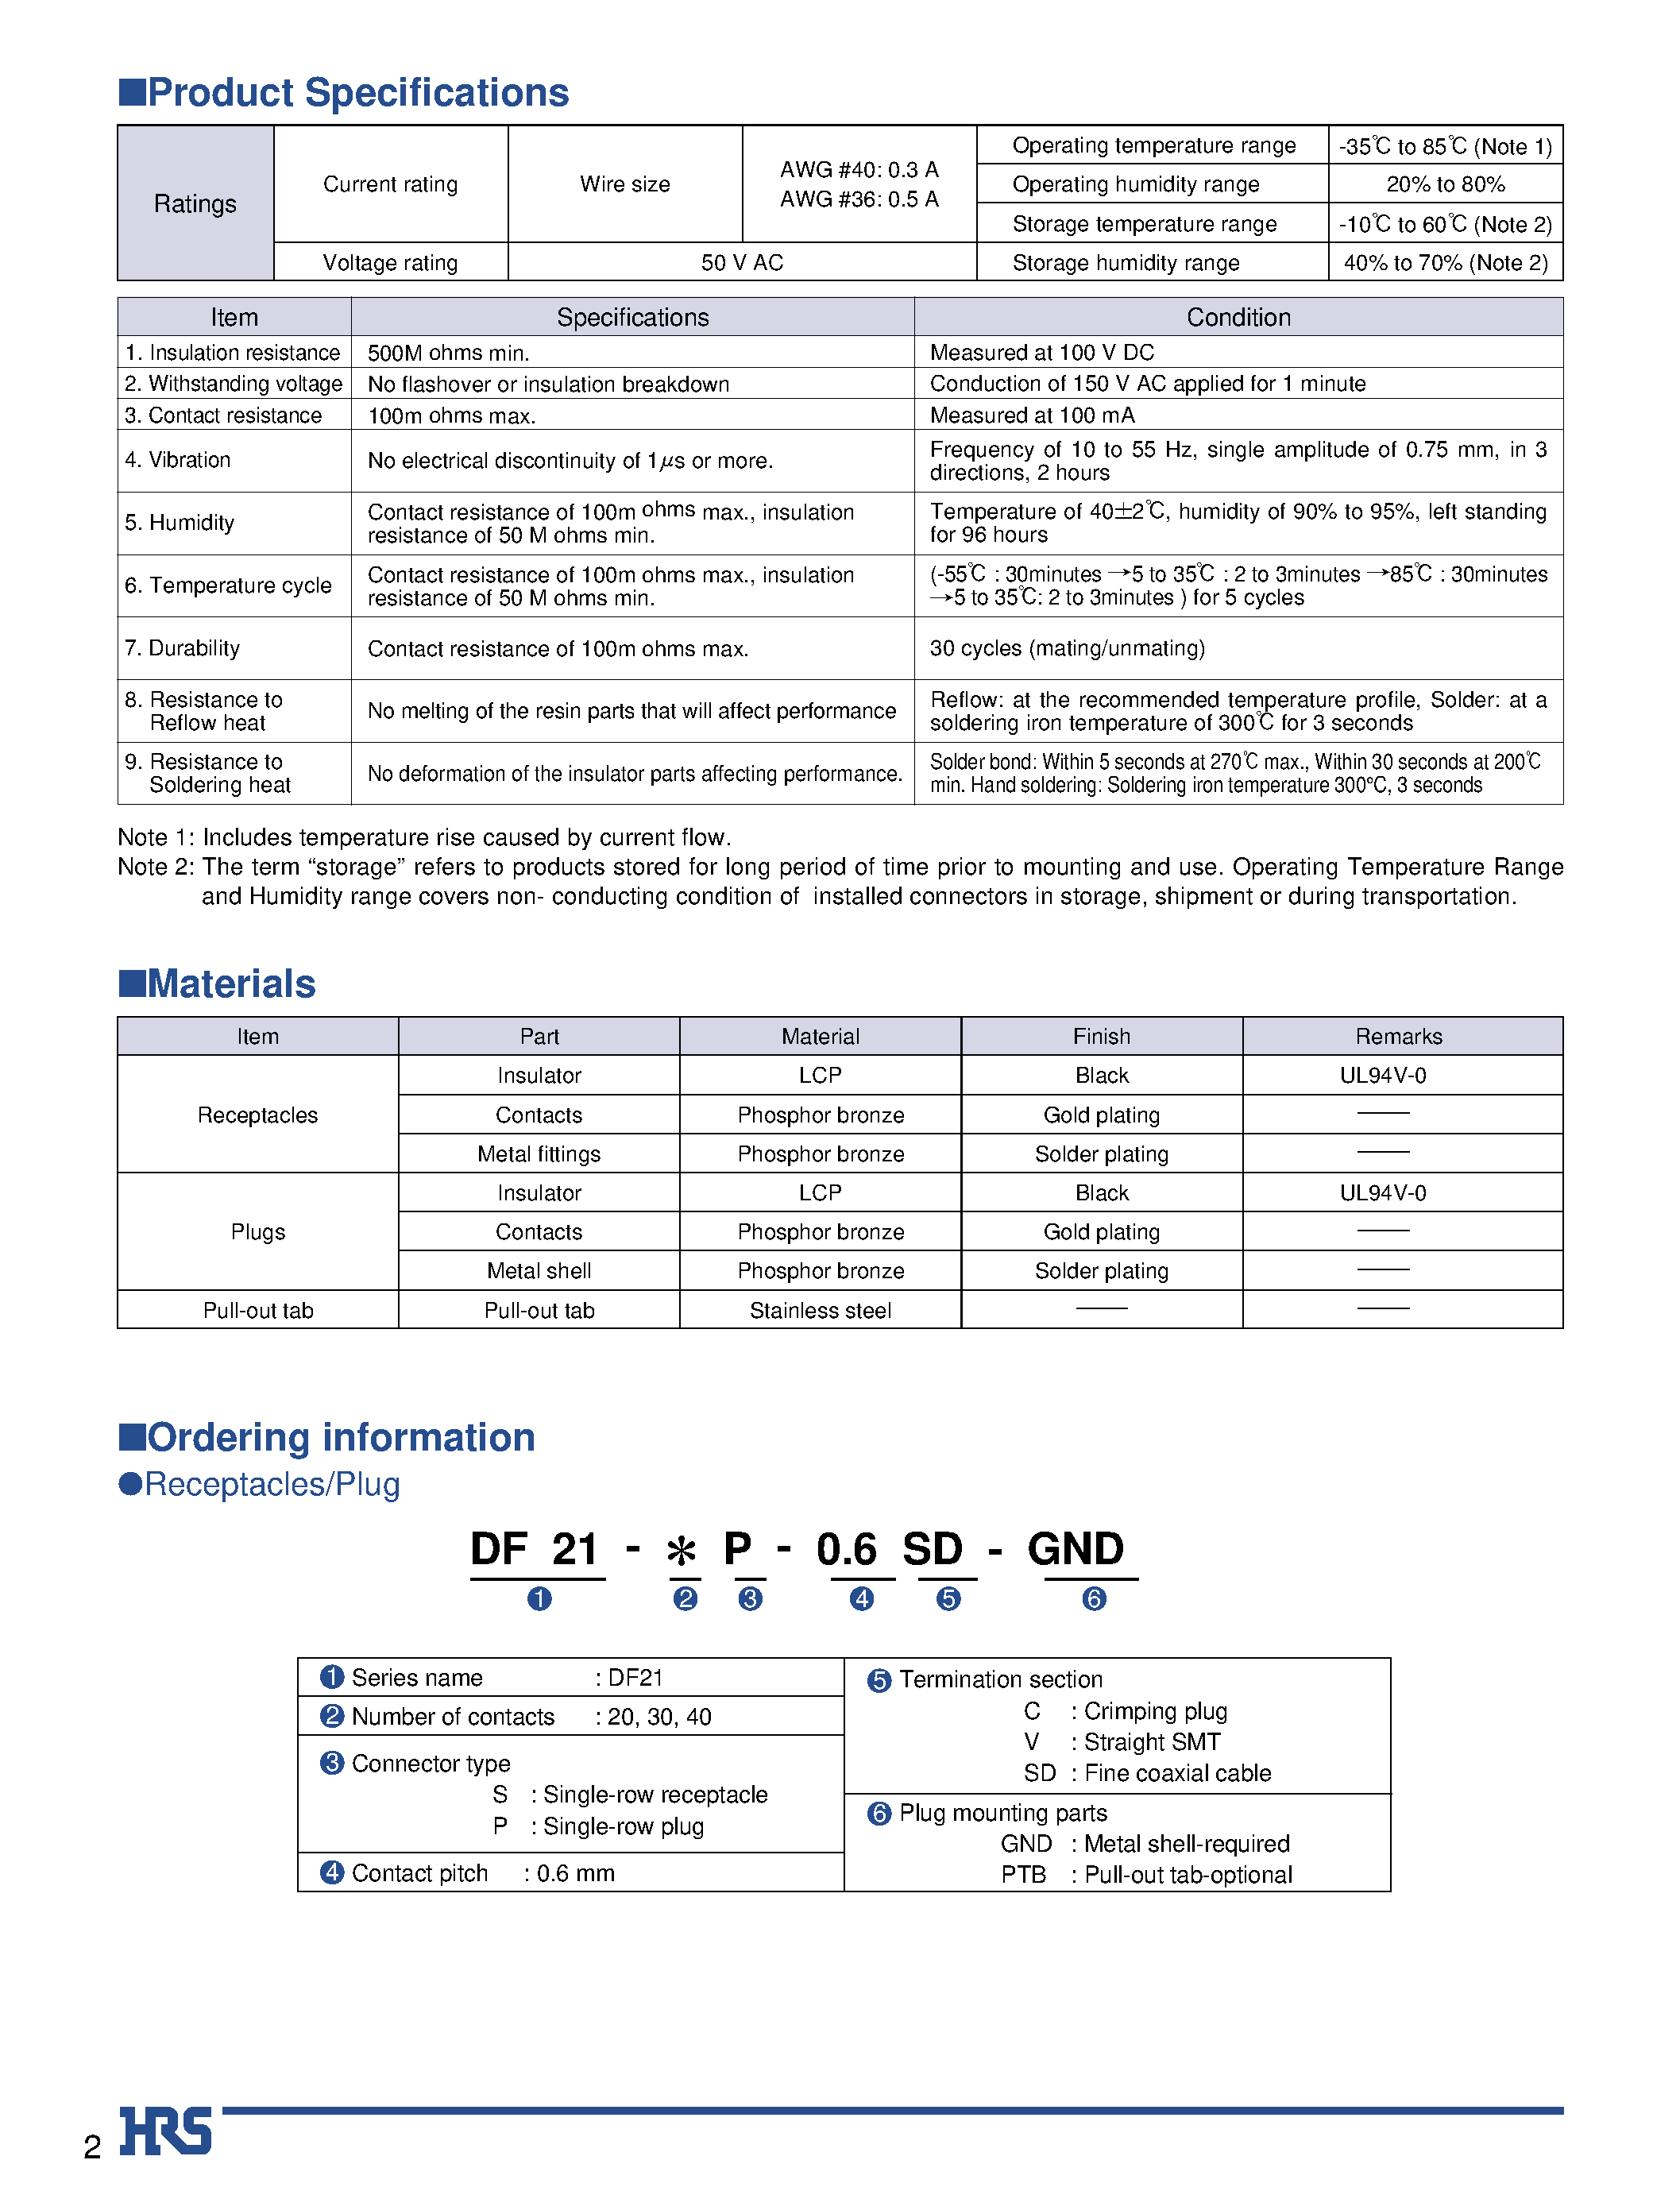 Datasheet DF21-30S-0.6V - 0.6mm Pitch Board-to-Fine-Coaxial Cable Connectors page 2